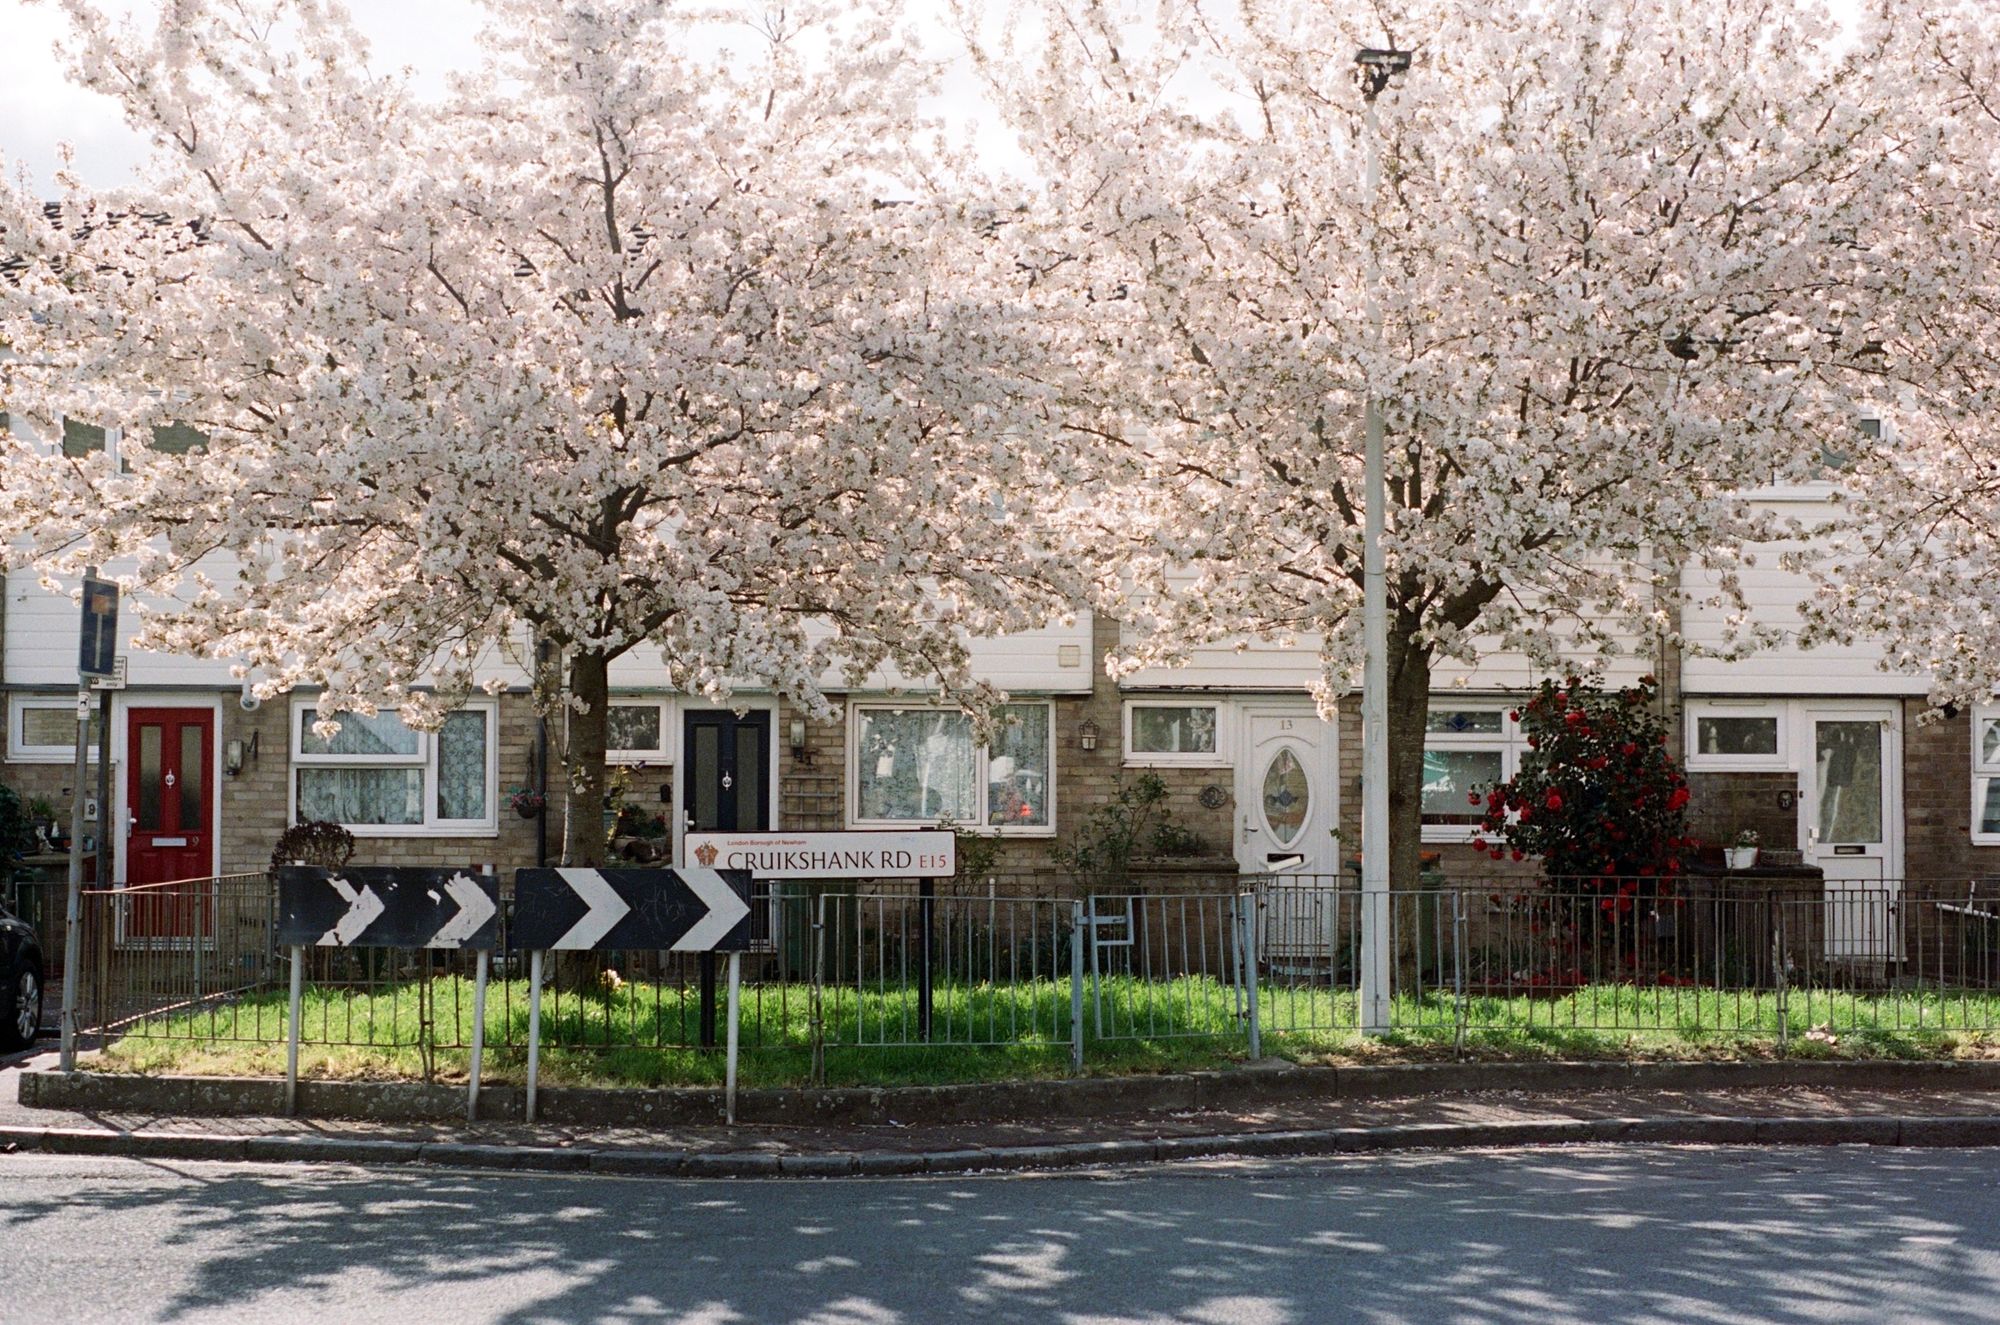 A street called Cruikshank Road with a row of terraced houses and some guardrail around a green area. Two large cherry trees sit in the grassy area, and are in full white blossom, which is feathered by the the sun from behind.